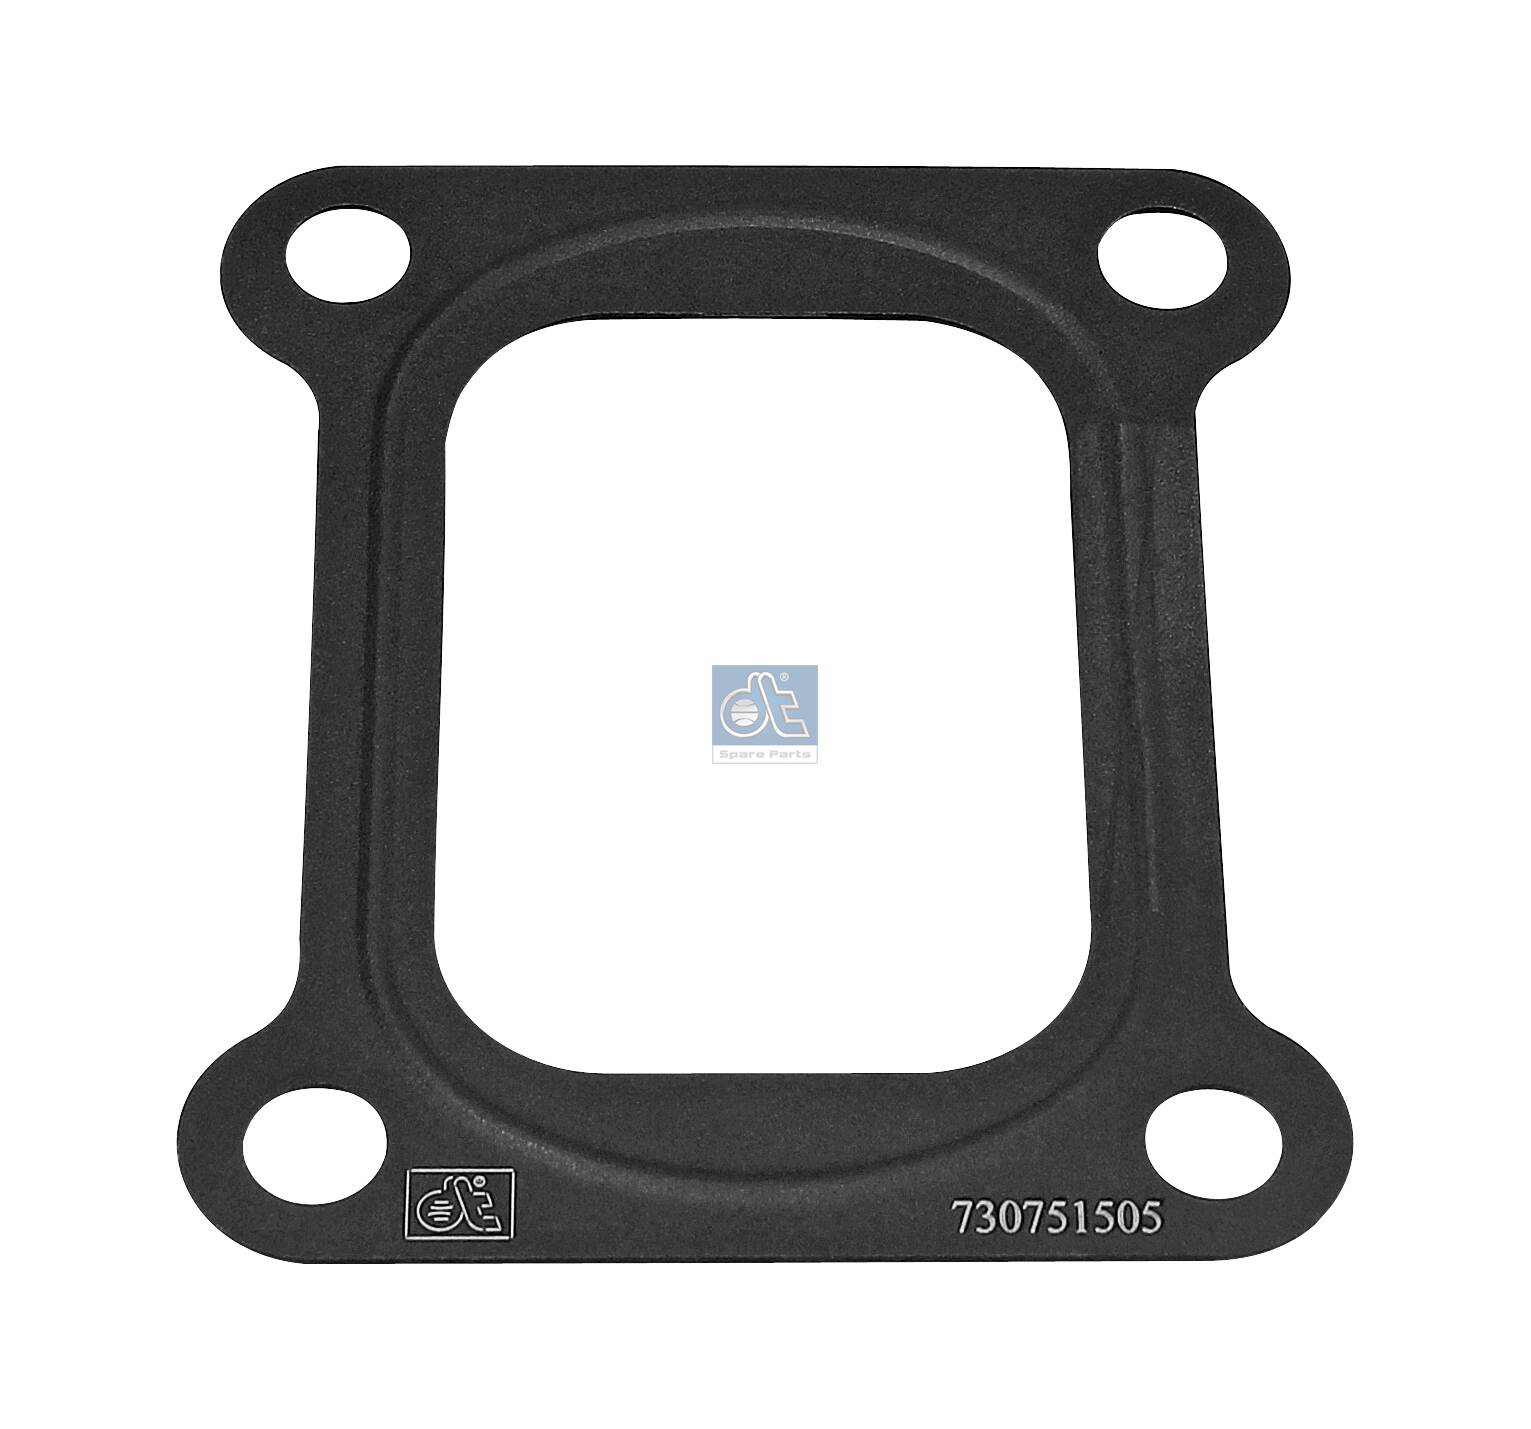 2.14205, Gasket, charger, DT Spare Parts, 1545141, 7408194365, 20781146, 7420781146, 422779, 8194365, 00903300, 03.14.026, 034.283, 1451904, 21841, 409.330, 46772, 70-26399-20, 82119, EPL-1146, 21841.00, 69905, 70-42458-00, 755.443, EPL365, 69905DPH, EPL-779